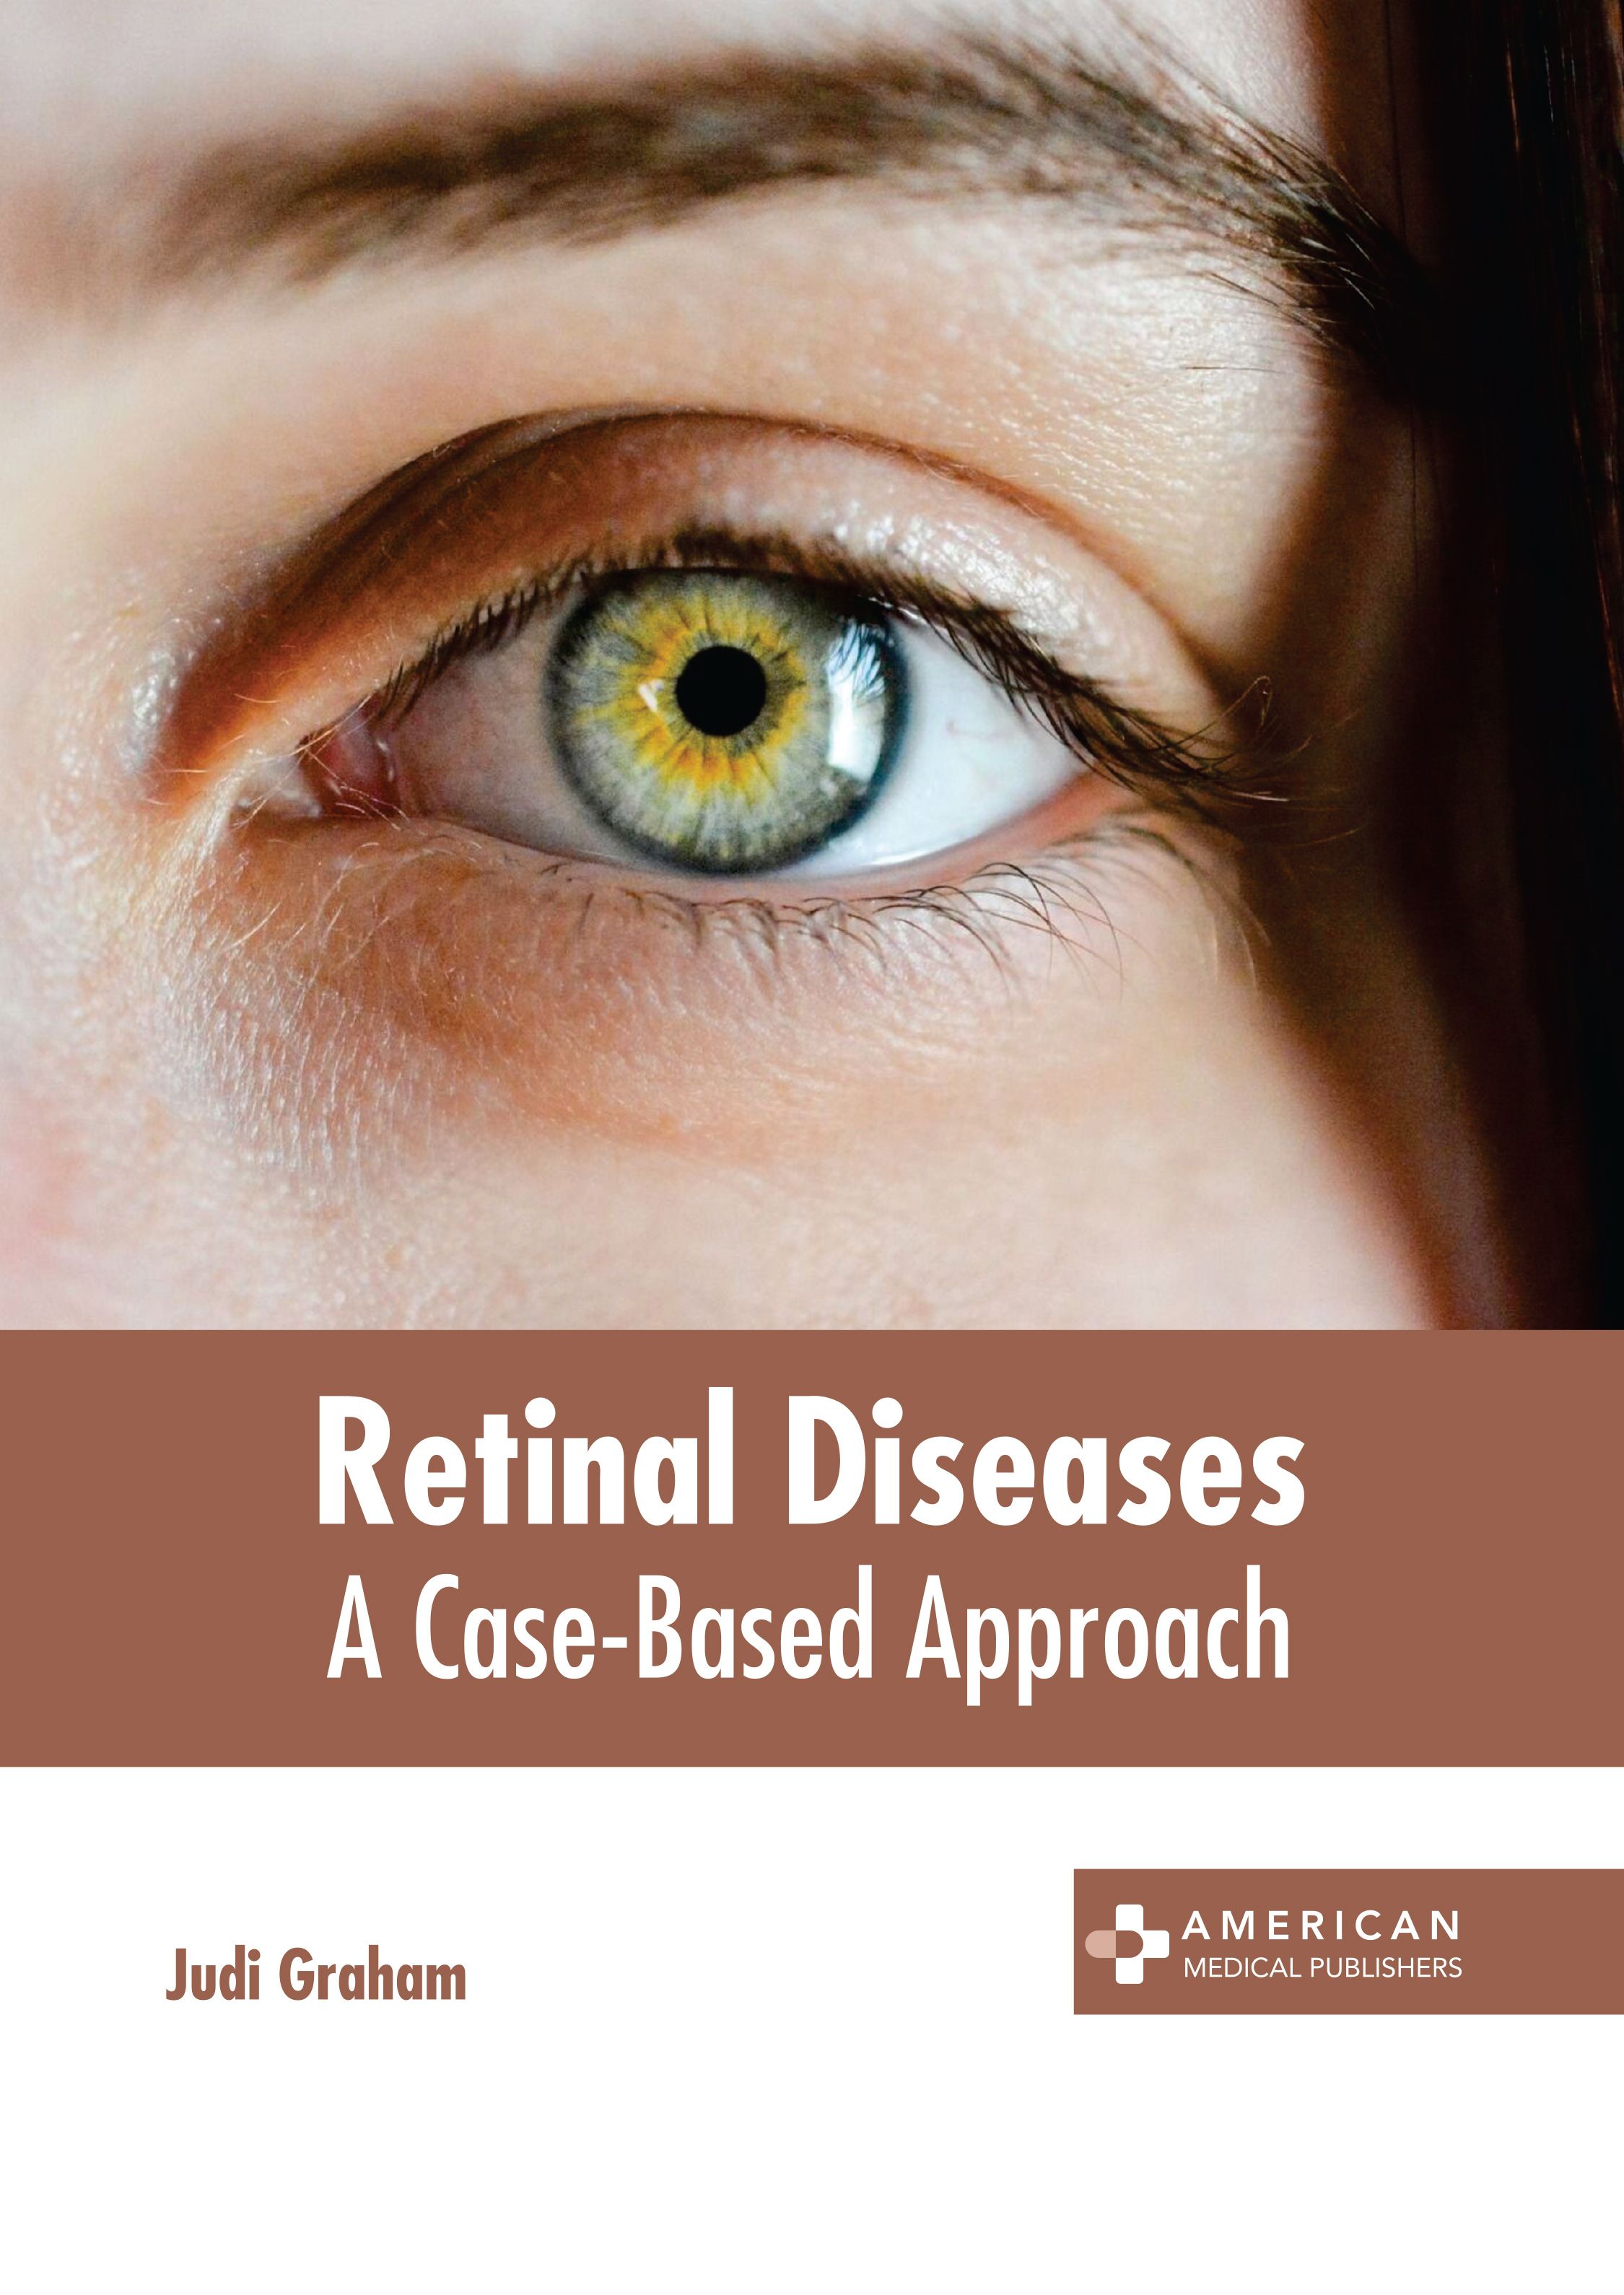 exclusive-publishers/american-medical-publishers/retinal-diseases-a-case-based-approach-9781639277971